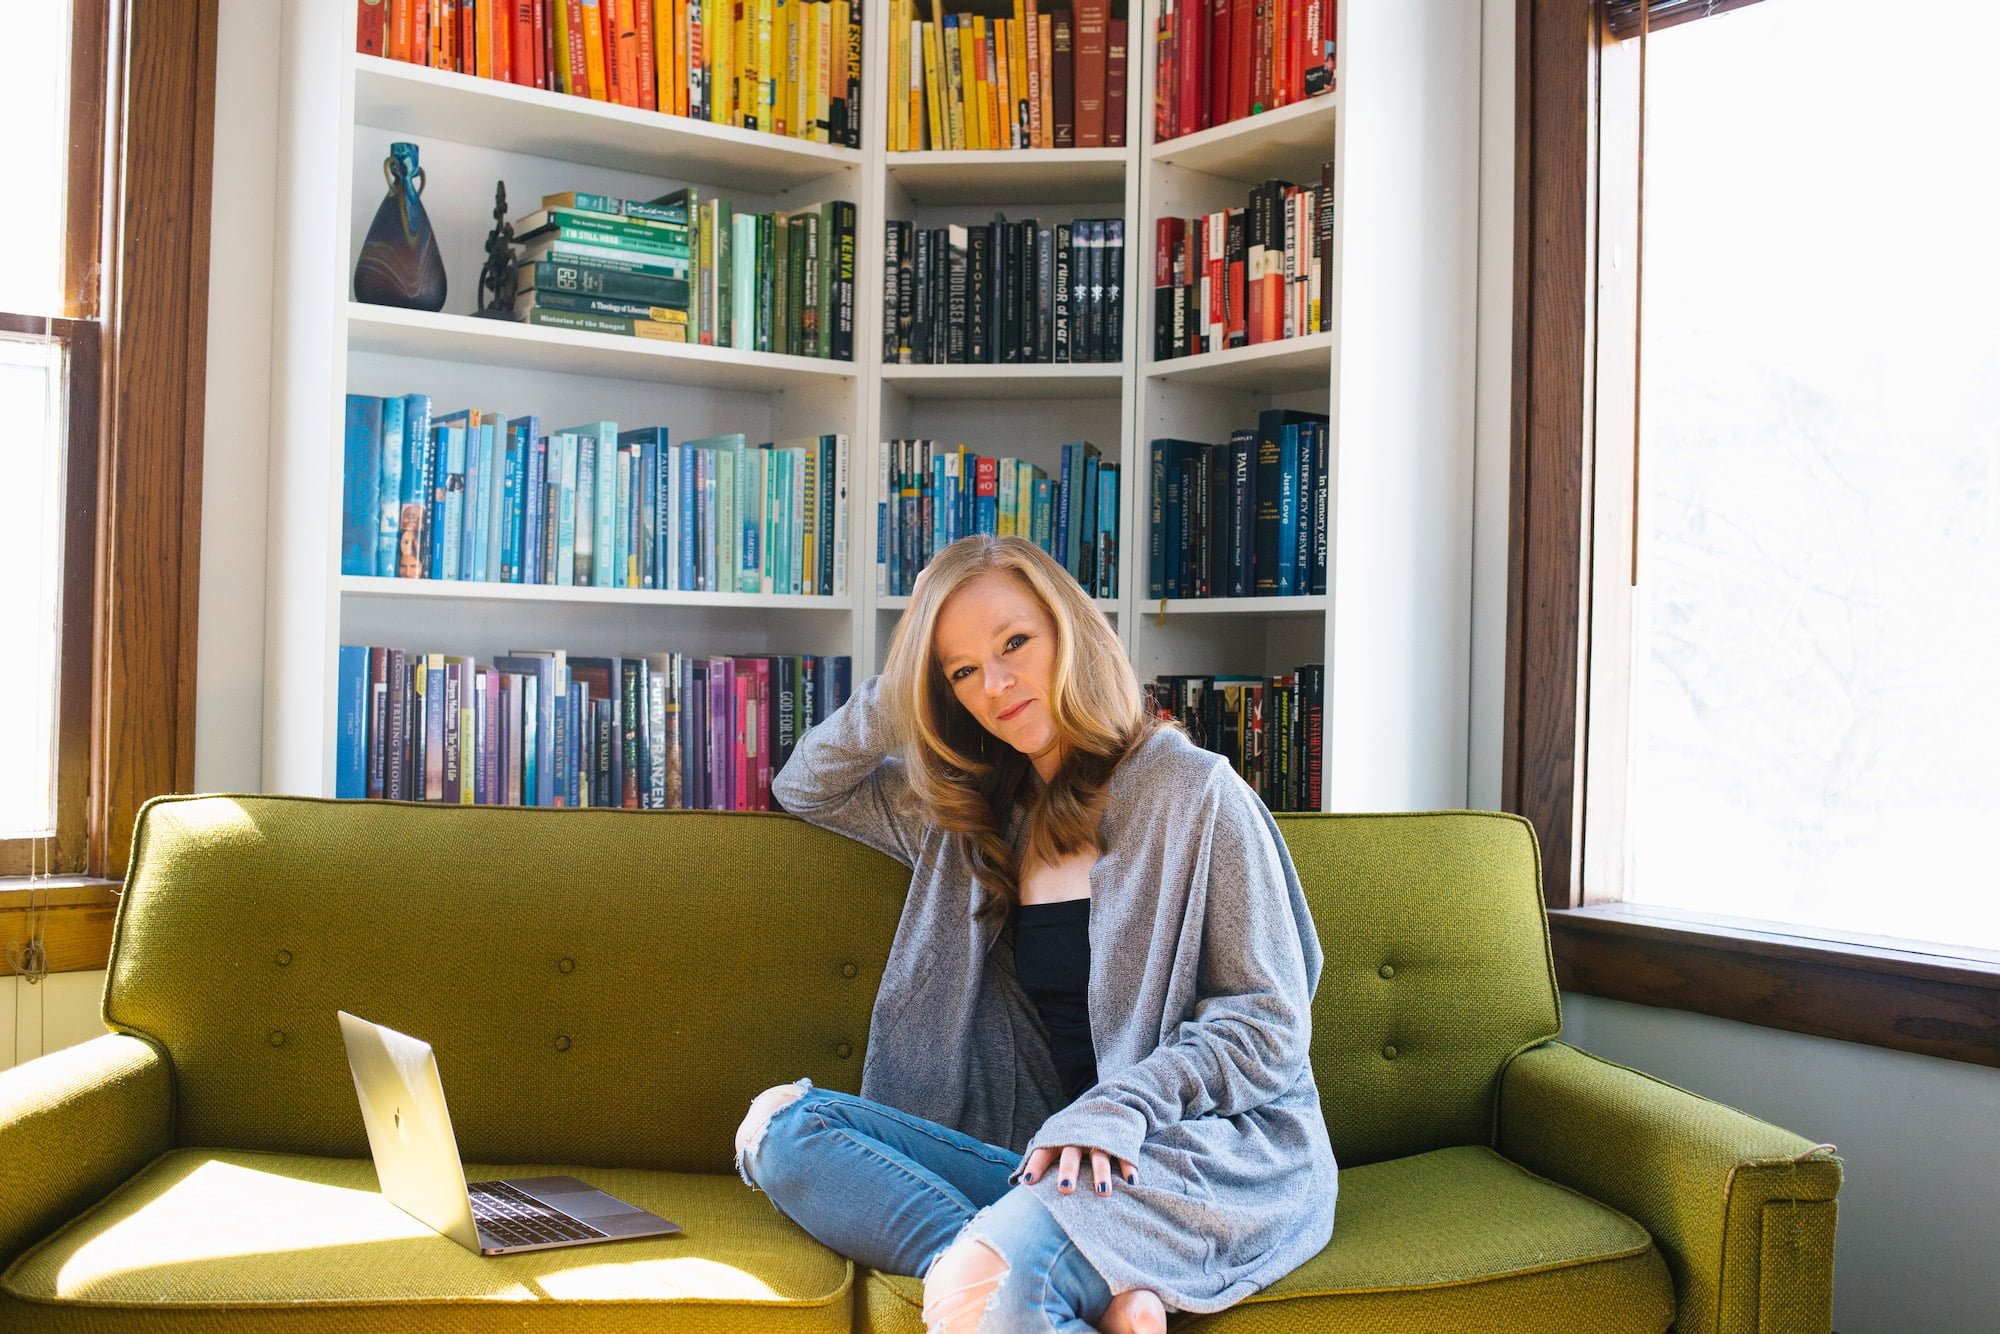 Ellie Roscher sitting on a couch in front of a shelf full of books